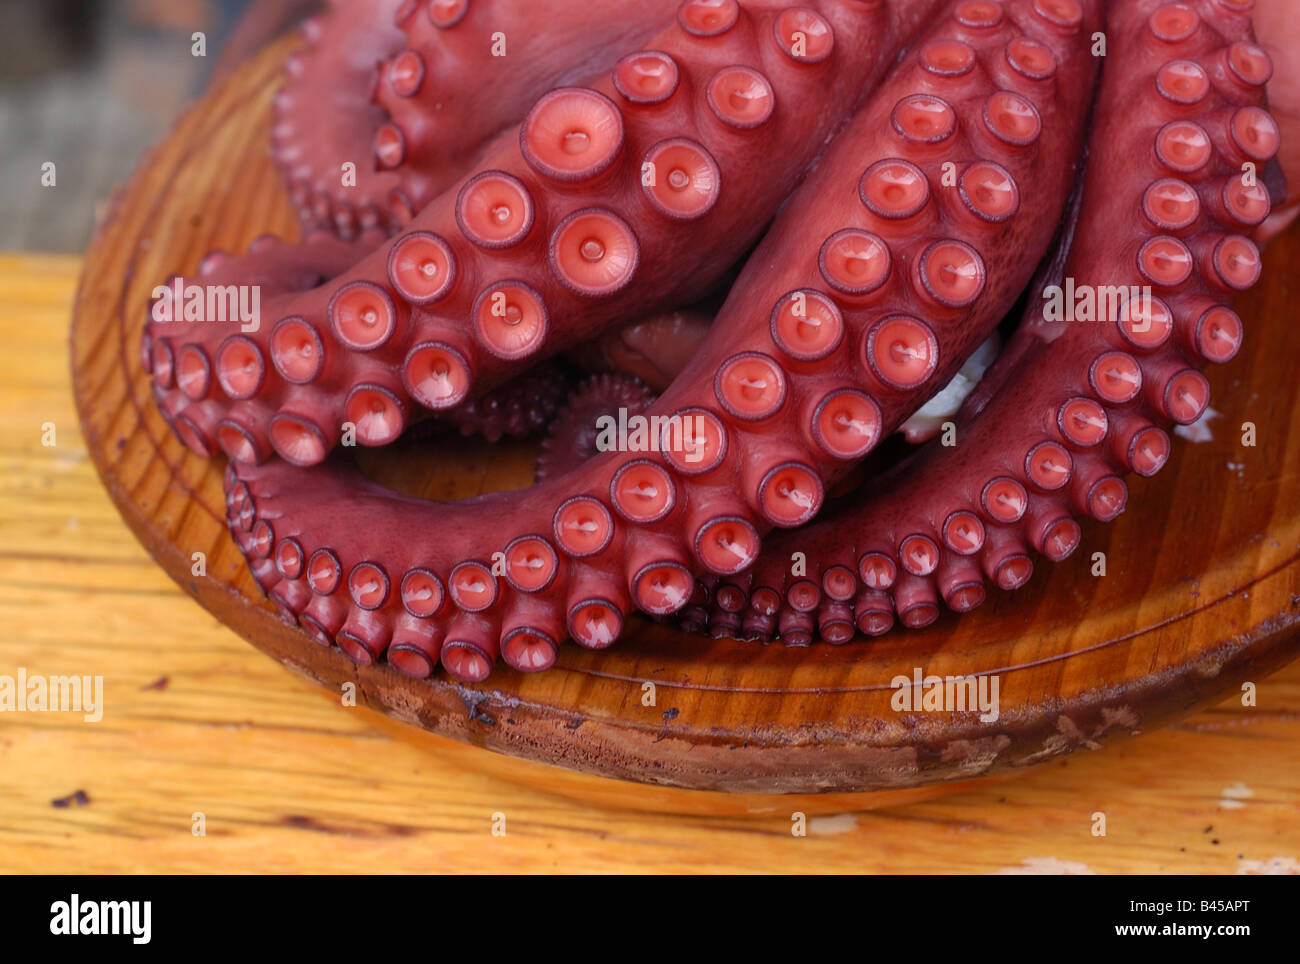 Octopus Pulpo red 'eight-footed'  seafood delicacy 'eight-footed' eight arms  tentacles squid  suction cups. Stock Photo